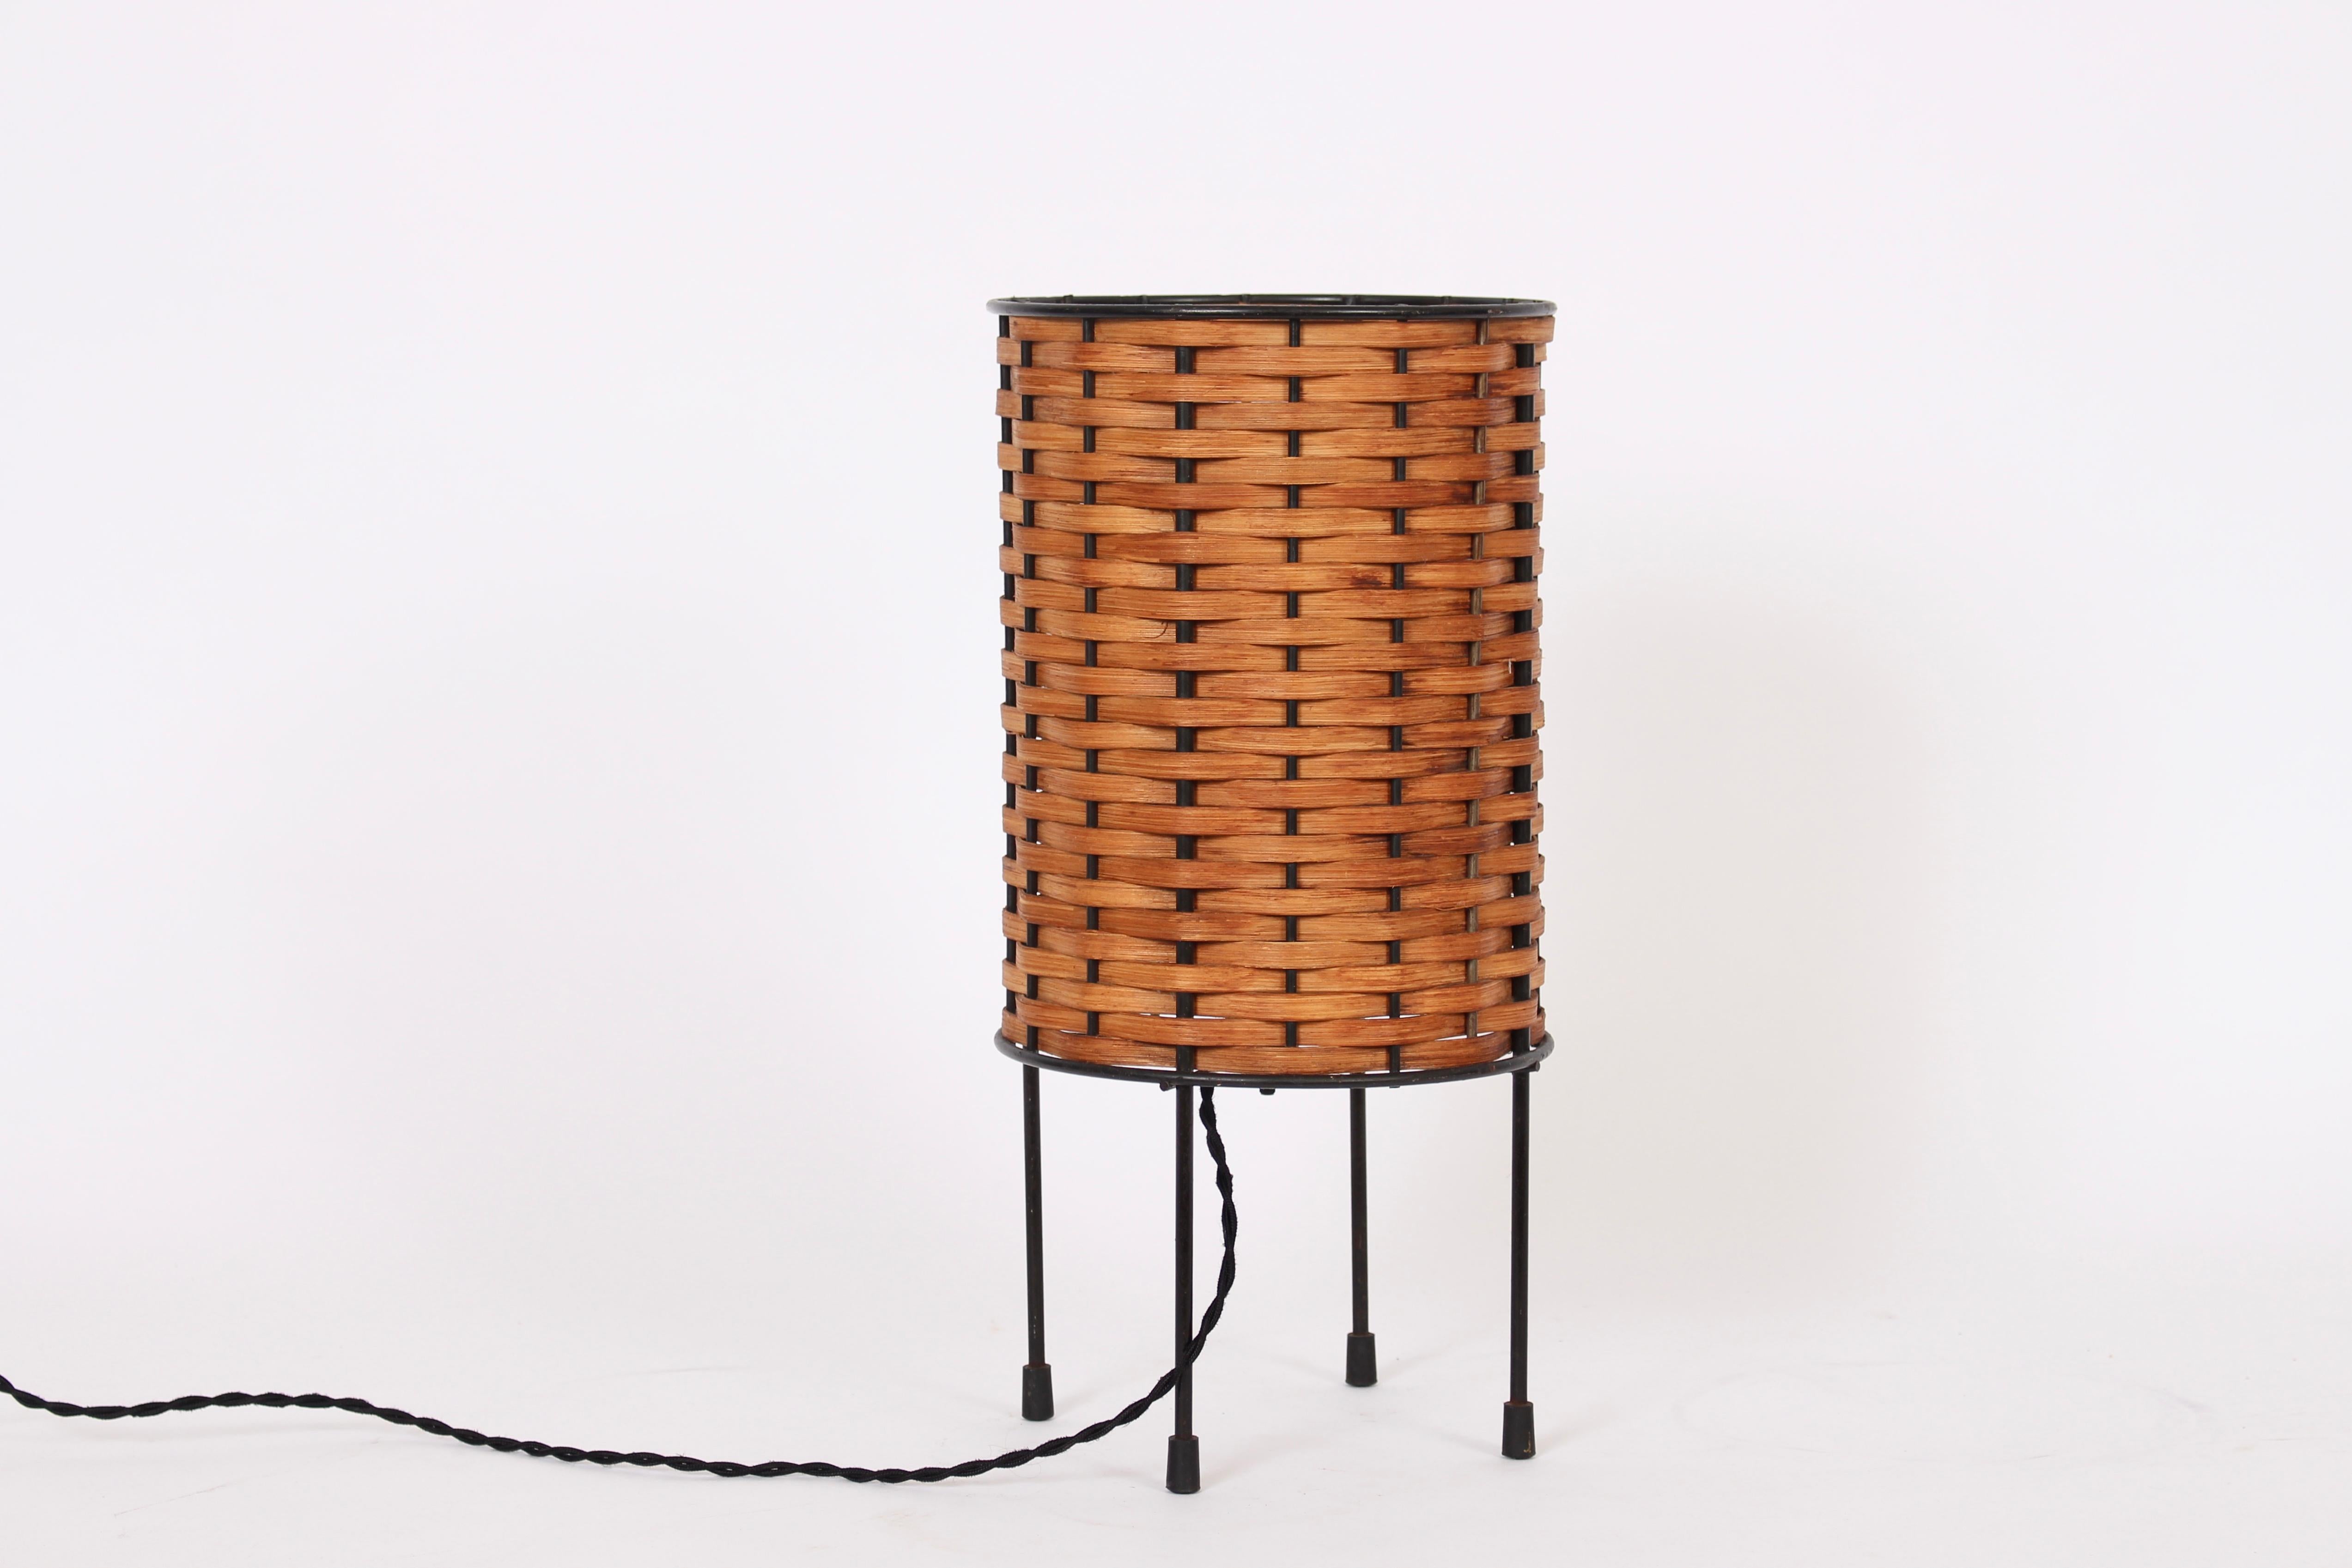 California Modern, Paul Mayen attributed, woven Oak Splint and Black Iron Wire Table Lamp. Featuring a cylindrical form, open Black enameled iron wire framework and tightly wrapped horizontal Oak weave on four wire legs detailed with capped feet.